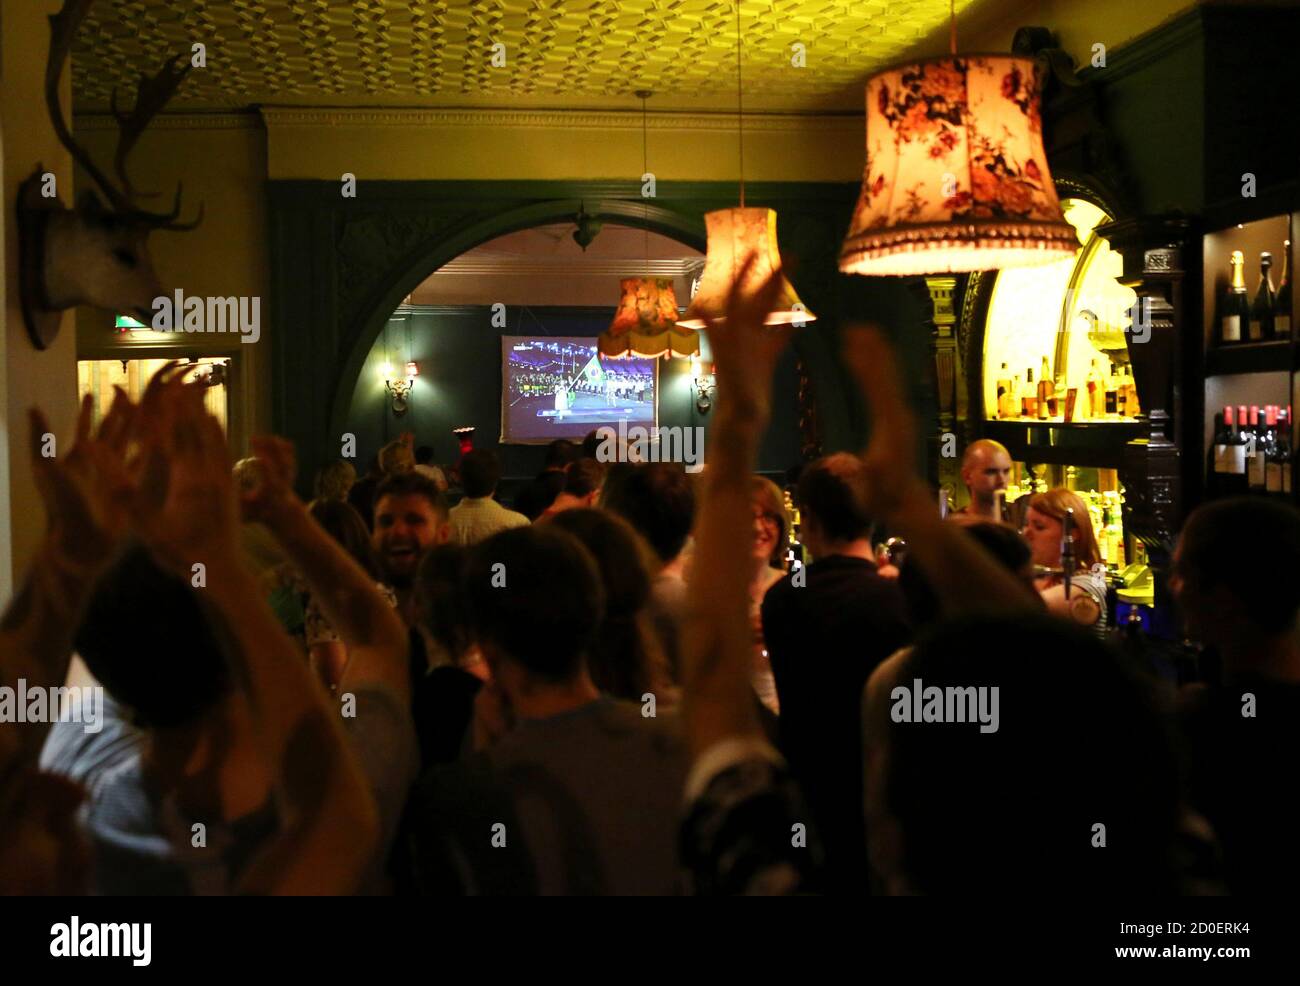 People watch the opening ceremony of the London 2012 Olympic Games at a pub in London July 27, 2012.  REUTERS/Sergio Moraes (BRITAIN - Tags: SPORT OLYMPICS) Stock Photo